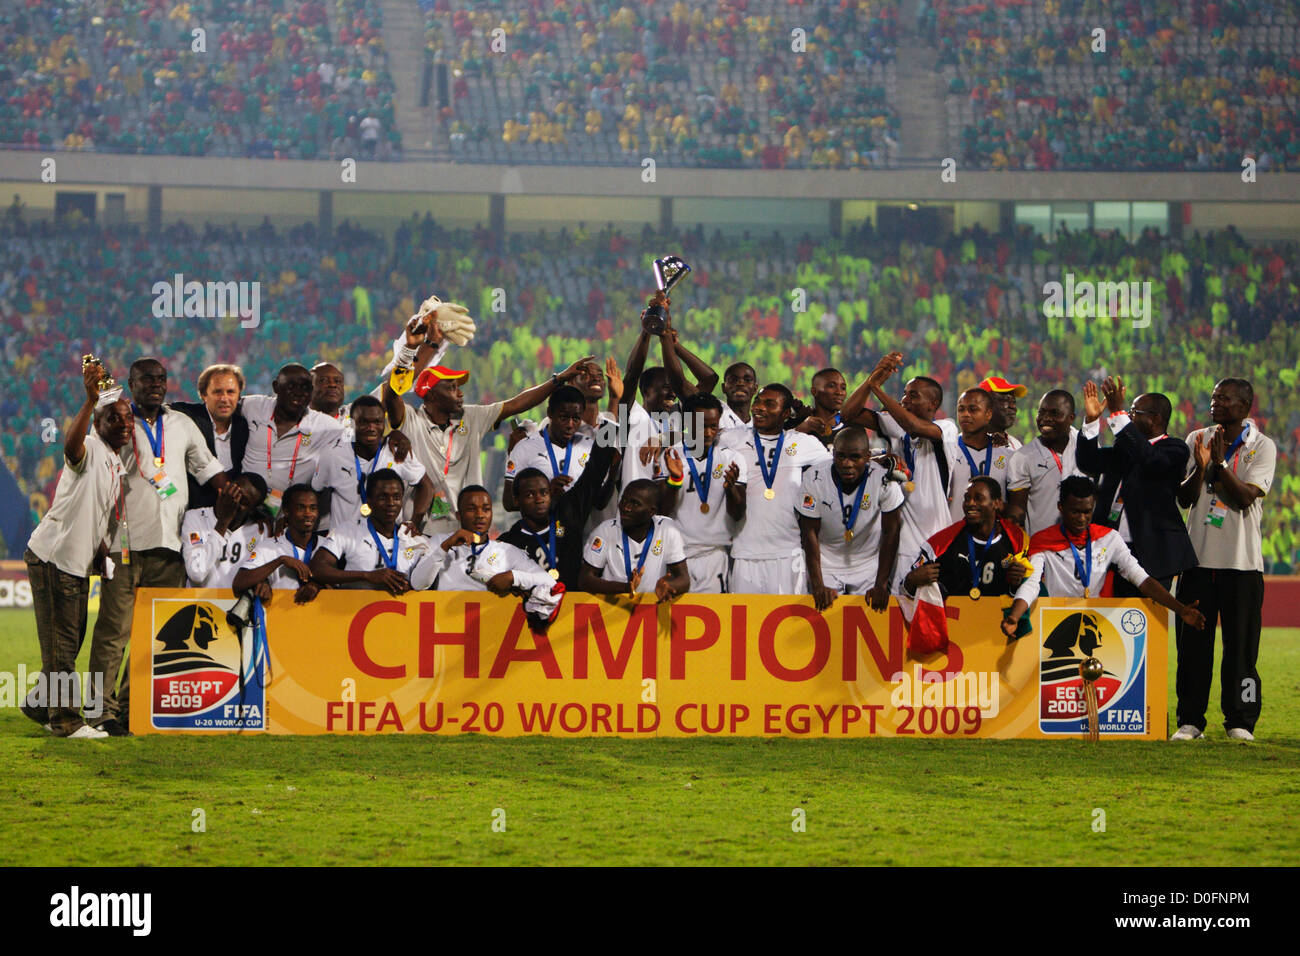 Ghana players and coaches celebrate after defeating Brazil on penalty kicks to win the 2009 FIFA U-20 World Cup. Stock Photo